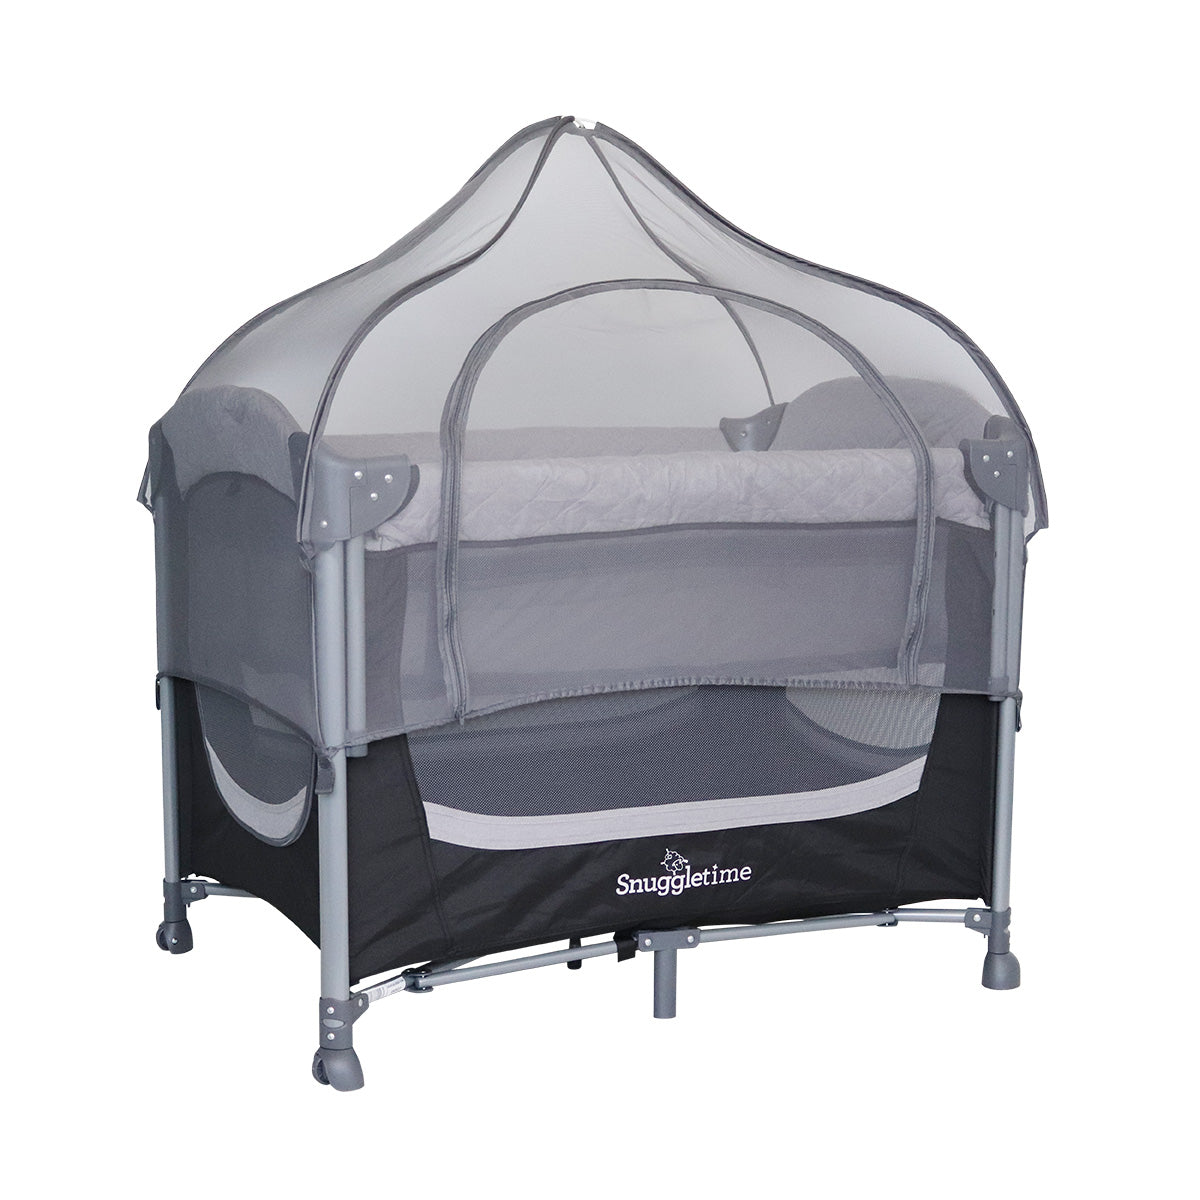 Quilted Co-Sleeper Camp Cot includes Dome Mosquito Net